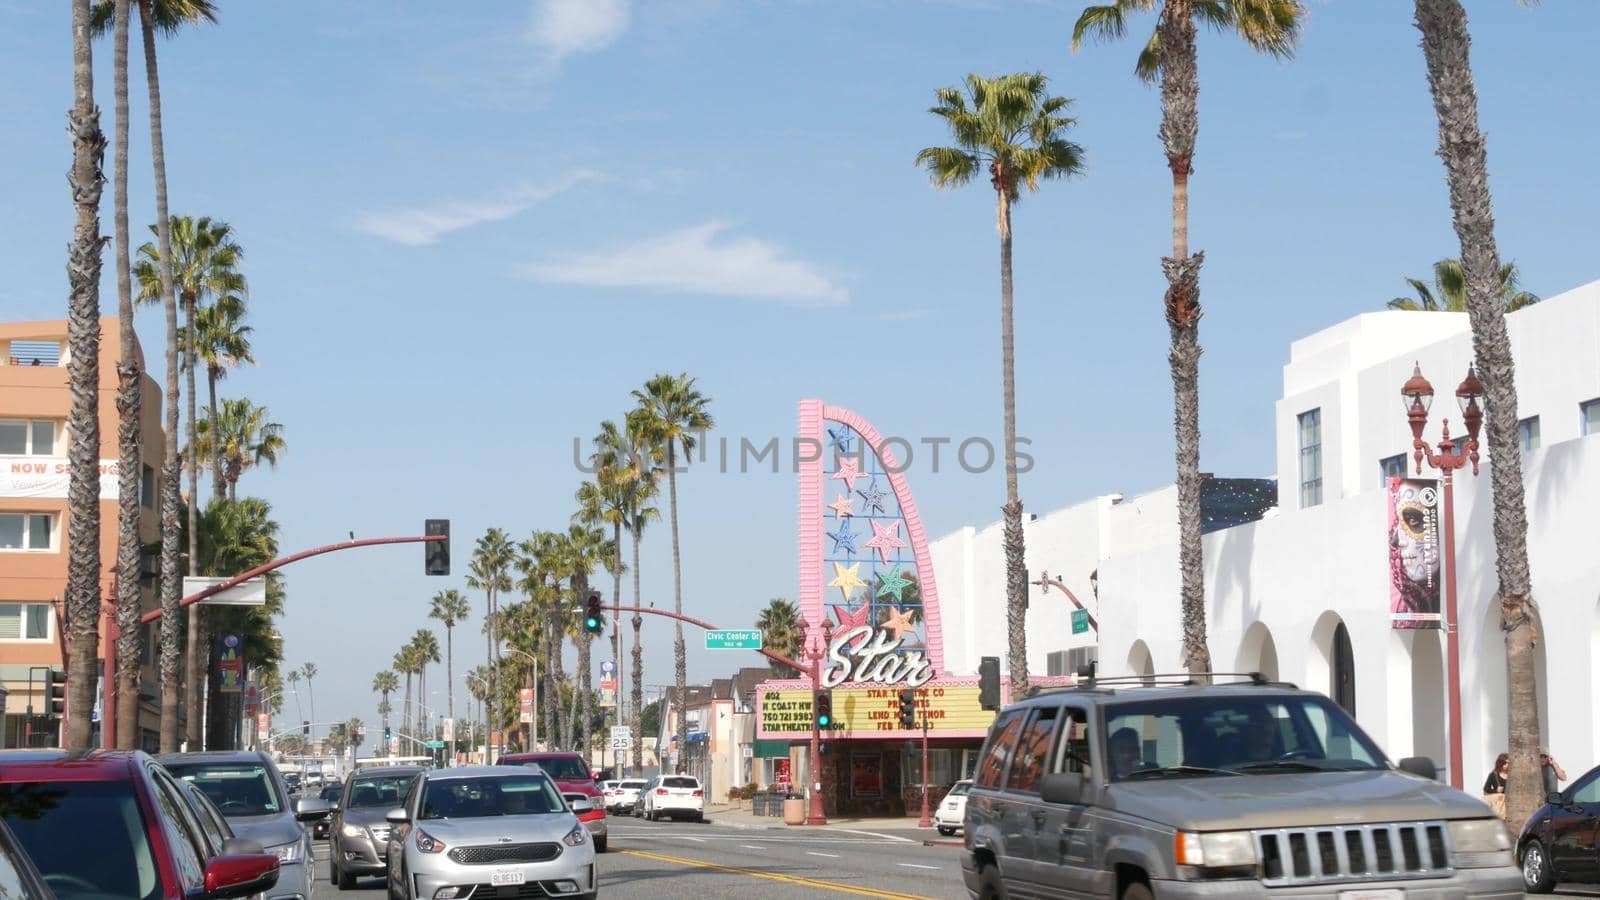 Oceanside, California USA - 20 Feb 2020: Authentic Star theatre on pacific coast highway 1, historic route 101. Palm trees on street, road along ocean. Retro vintage signboard. City near Los Angeles.